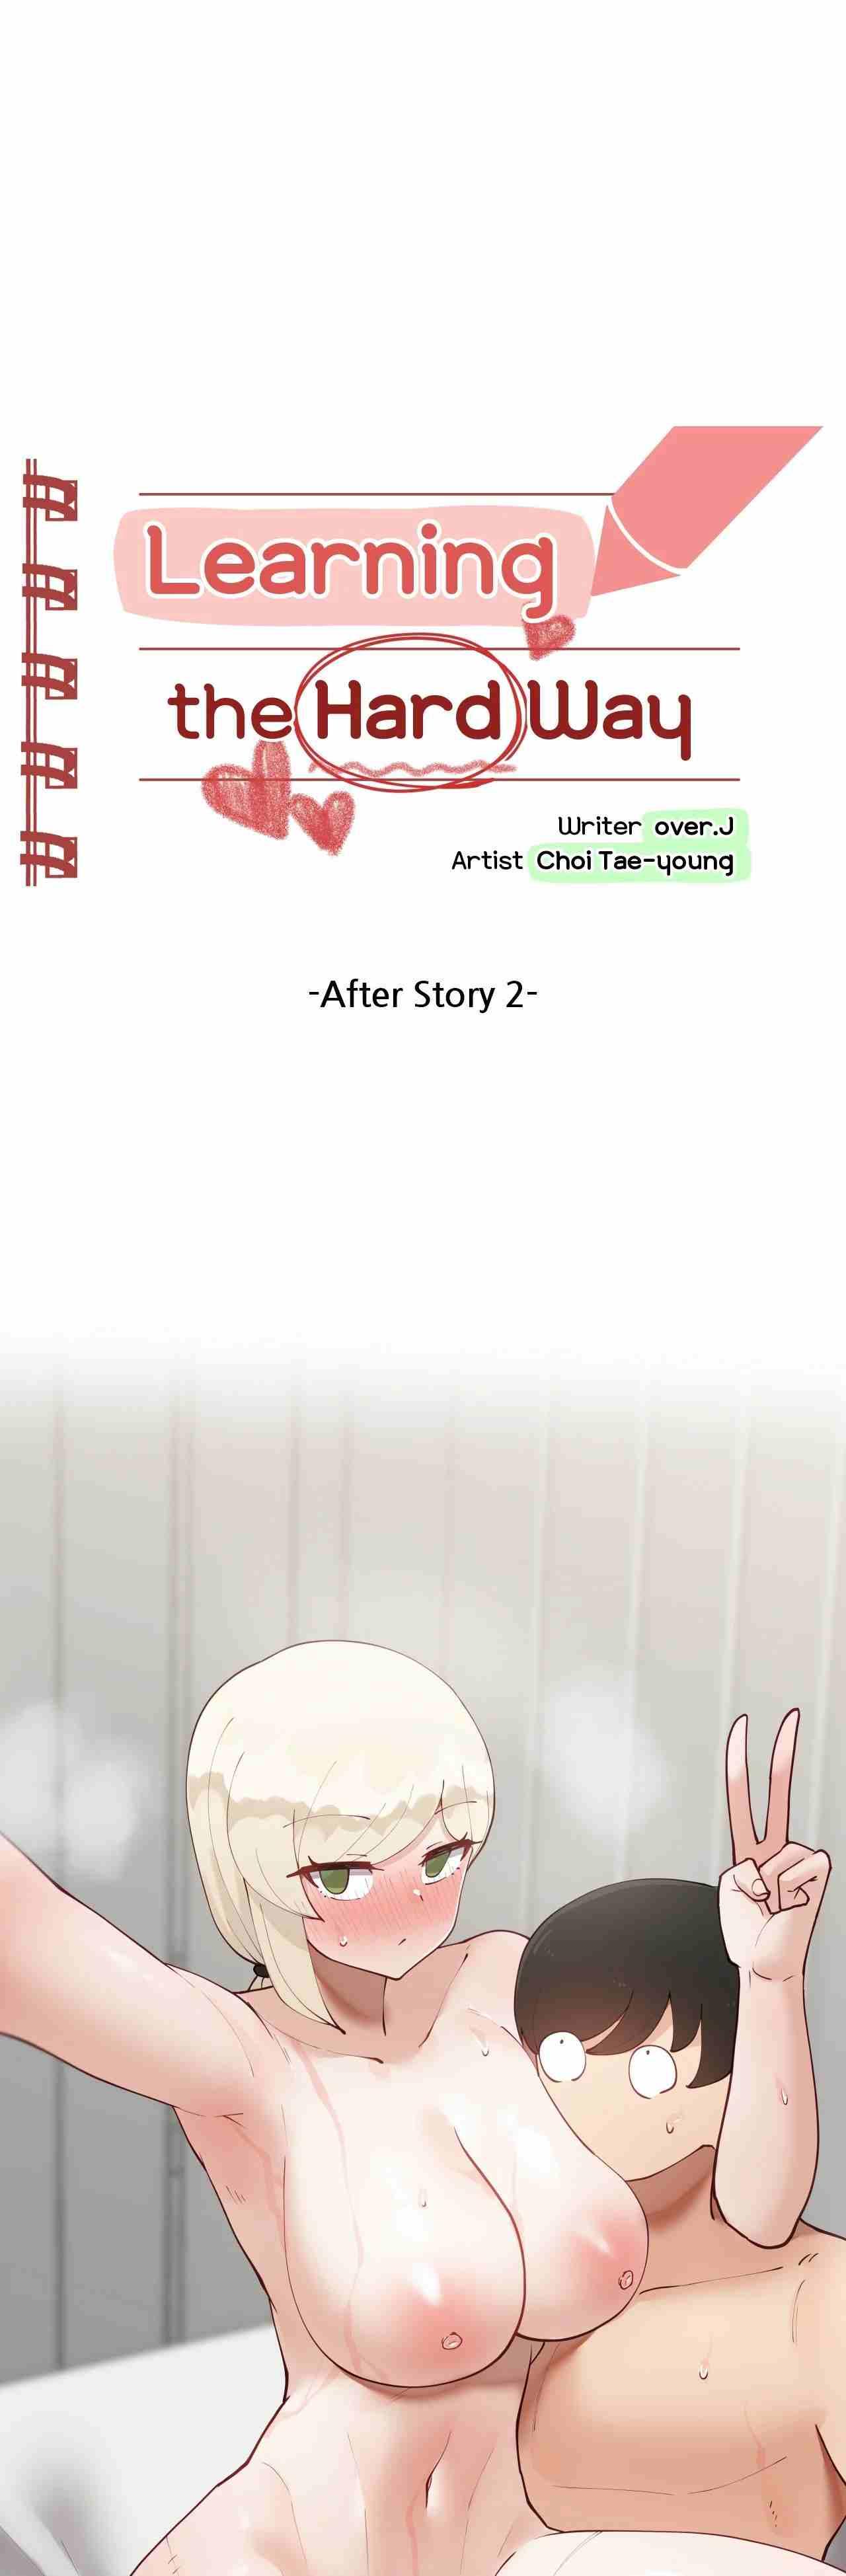 [Over.J, Choi Tae-young] Learning the Hard Way 2nd Season (After Story) Ch.3/? [English] [Manhwa PDF] Ongoing 49